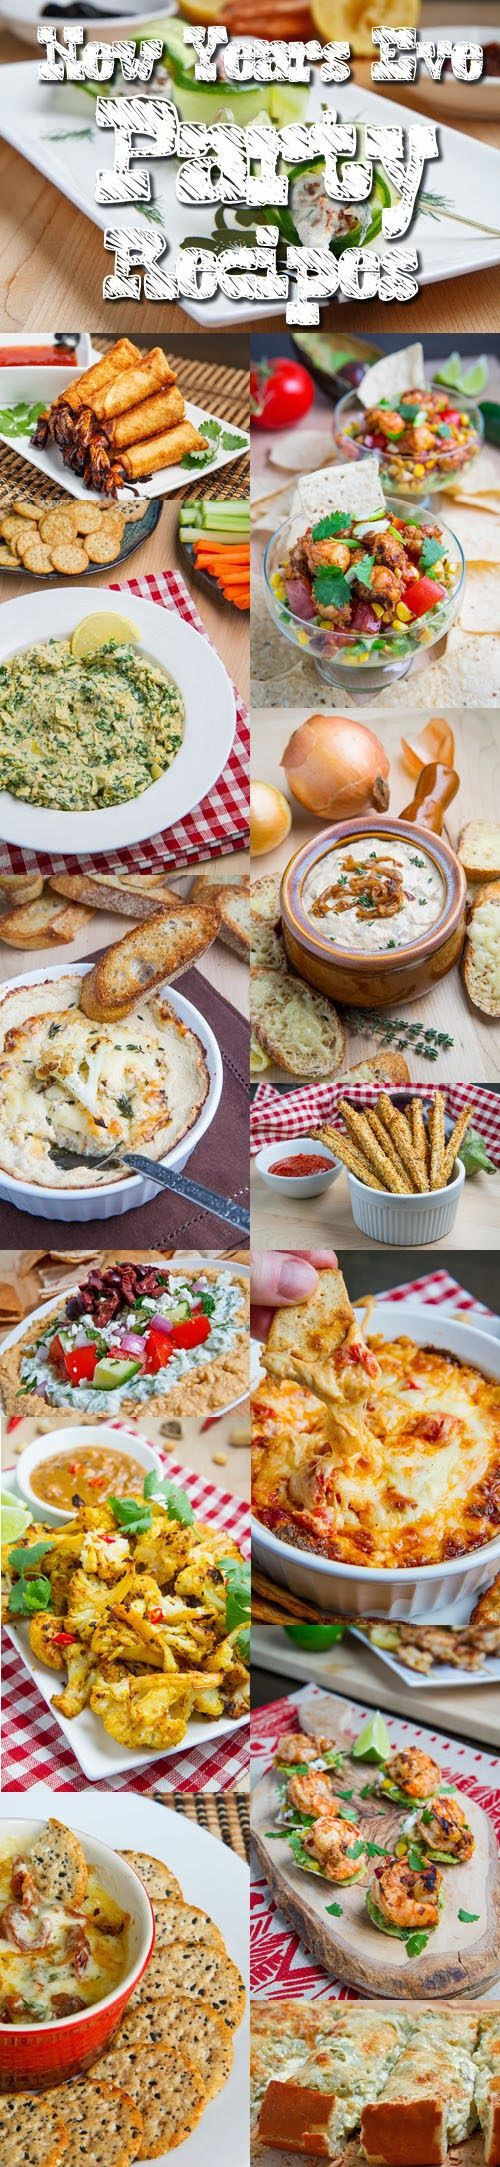 New Years Eve Dinner Party Food Ideas
 New Years Eve Party Recipes Roundups